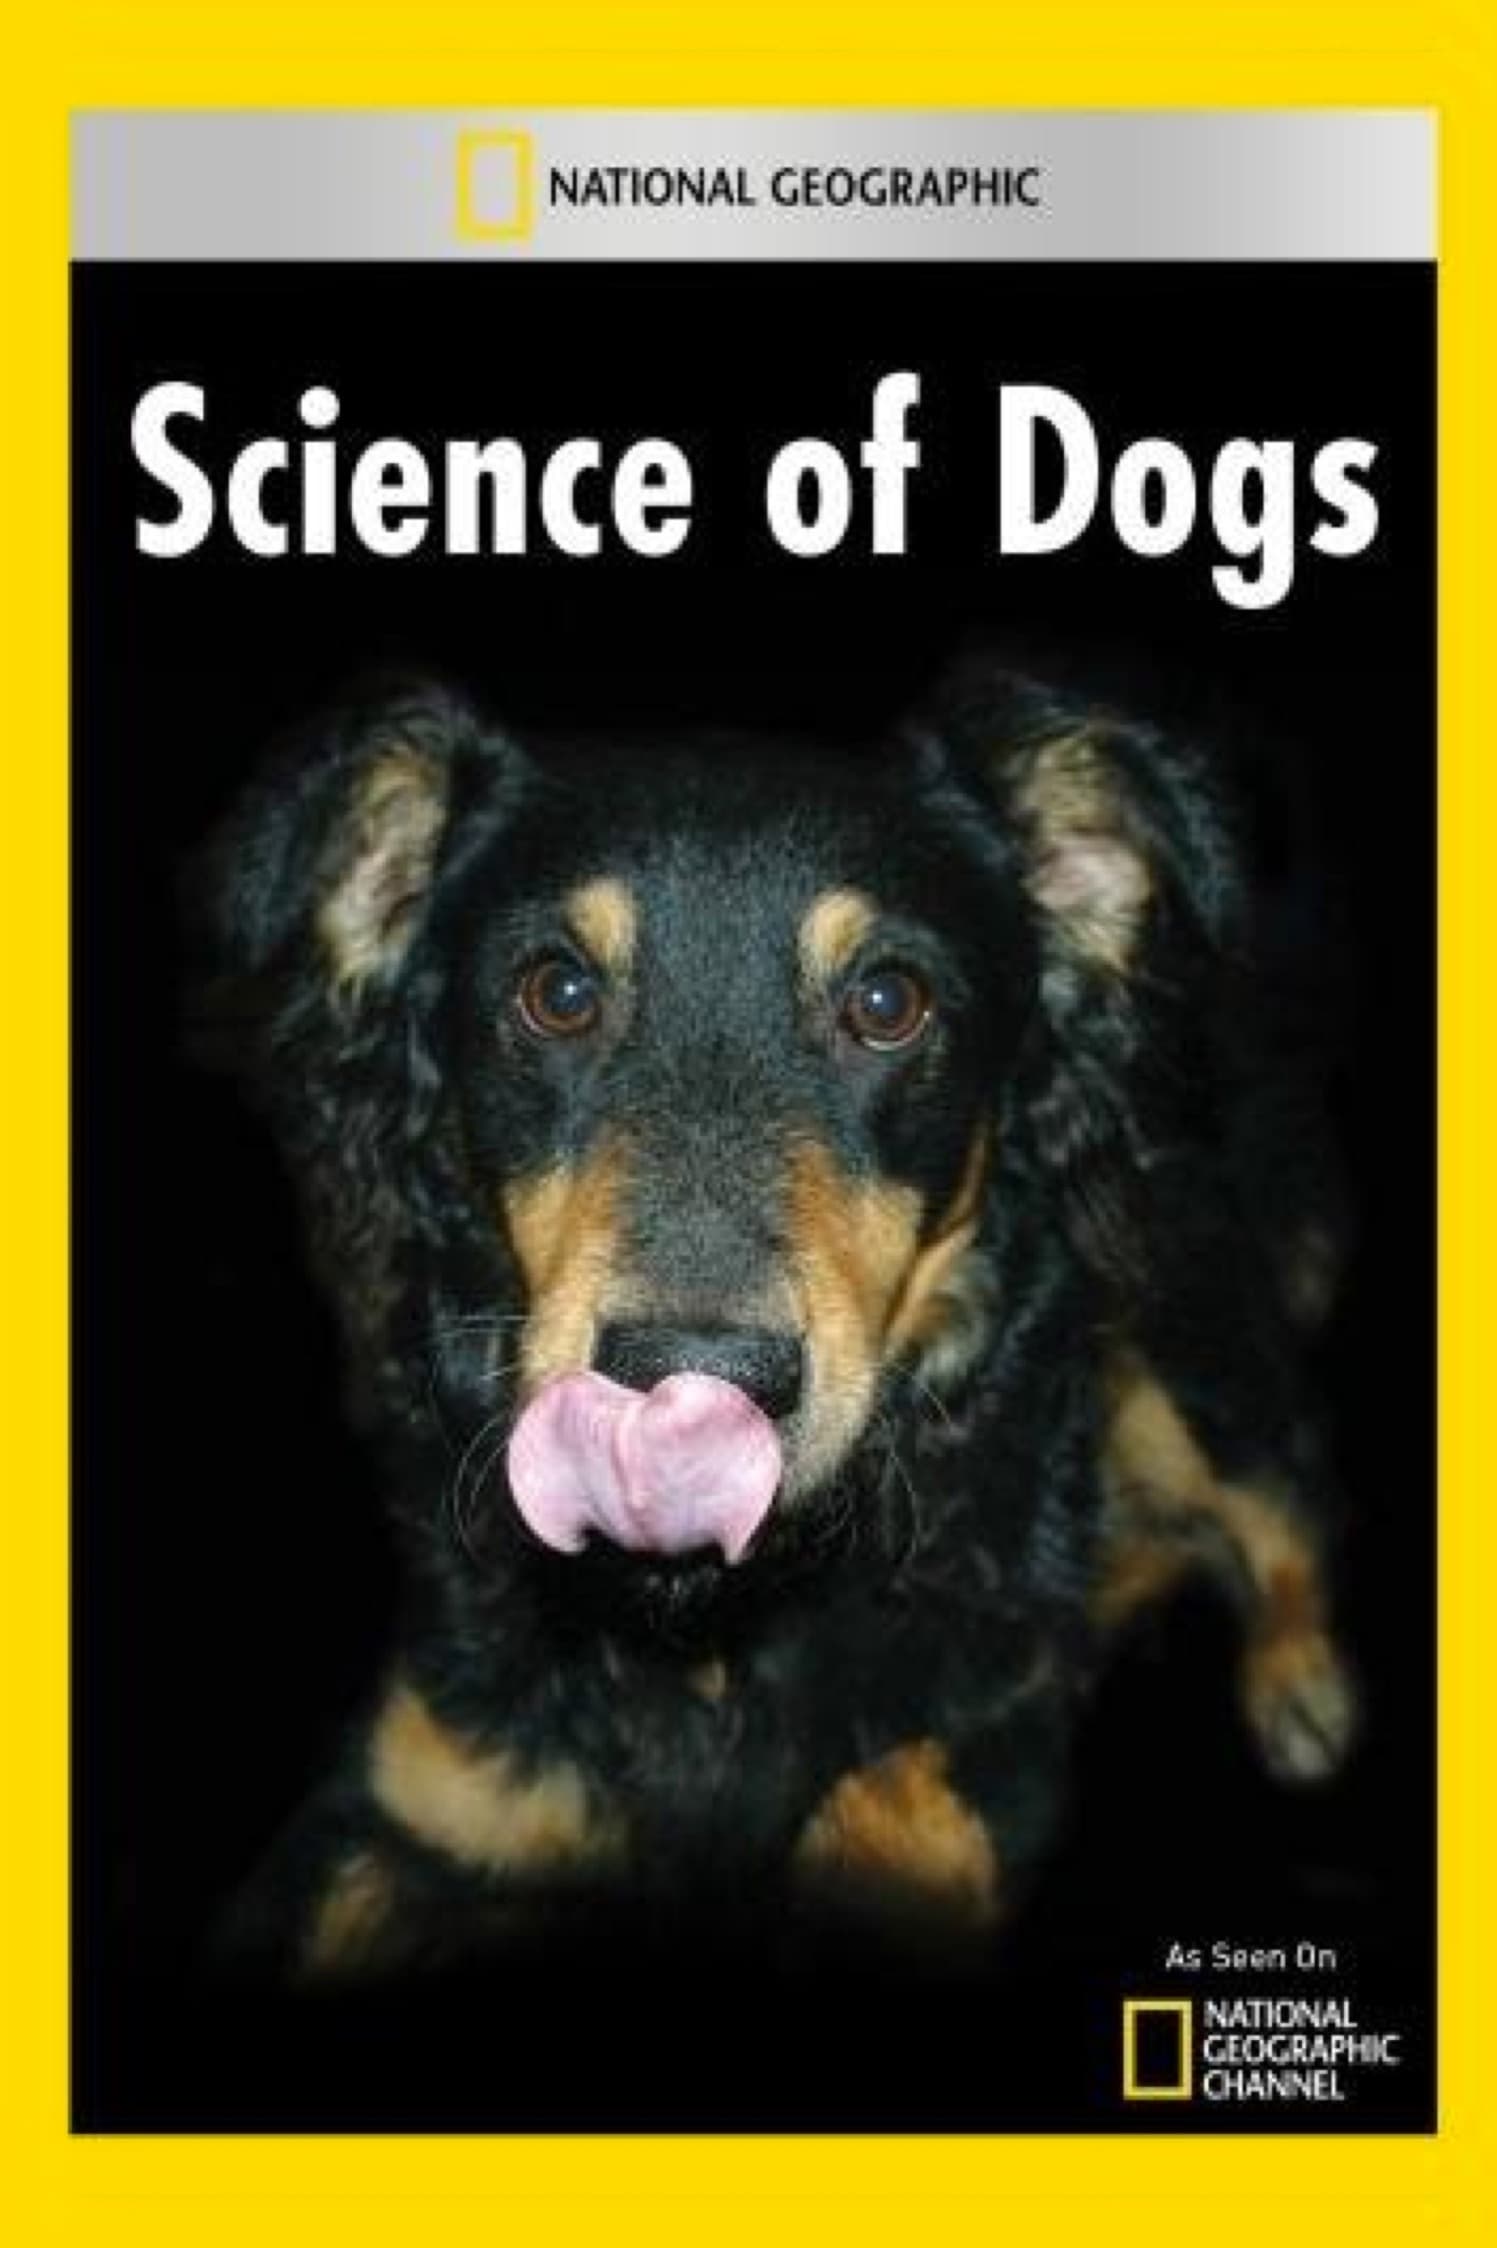 National Geographic Explorer: Science of Dogs